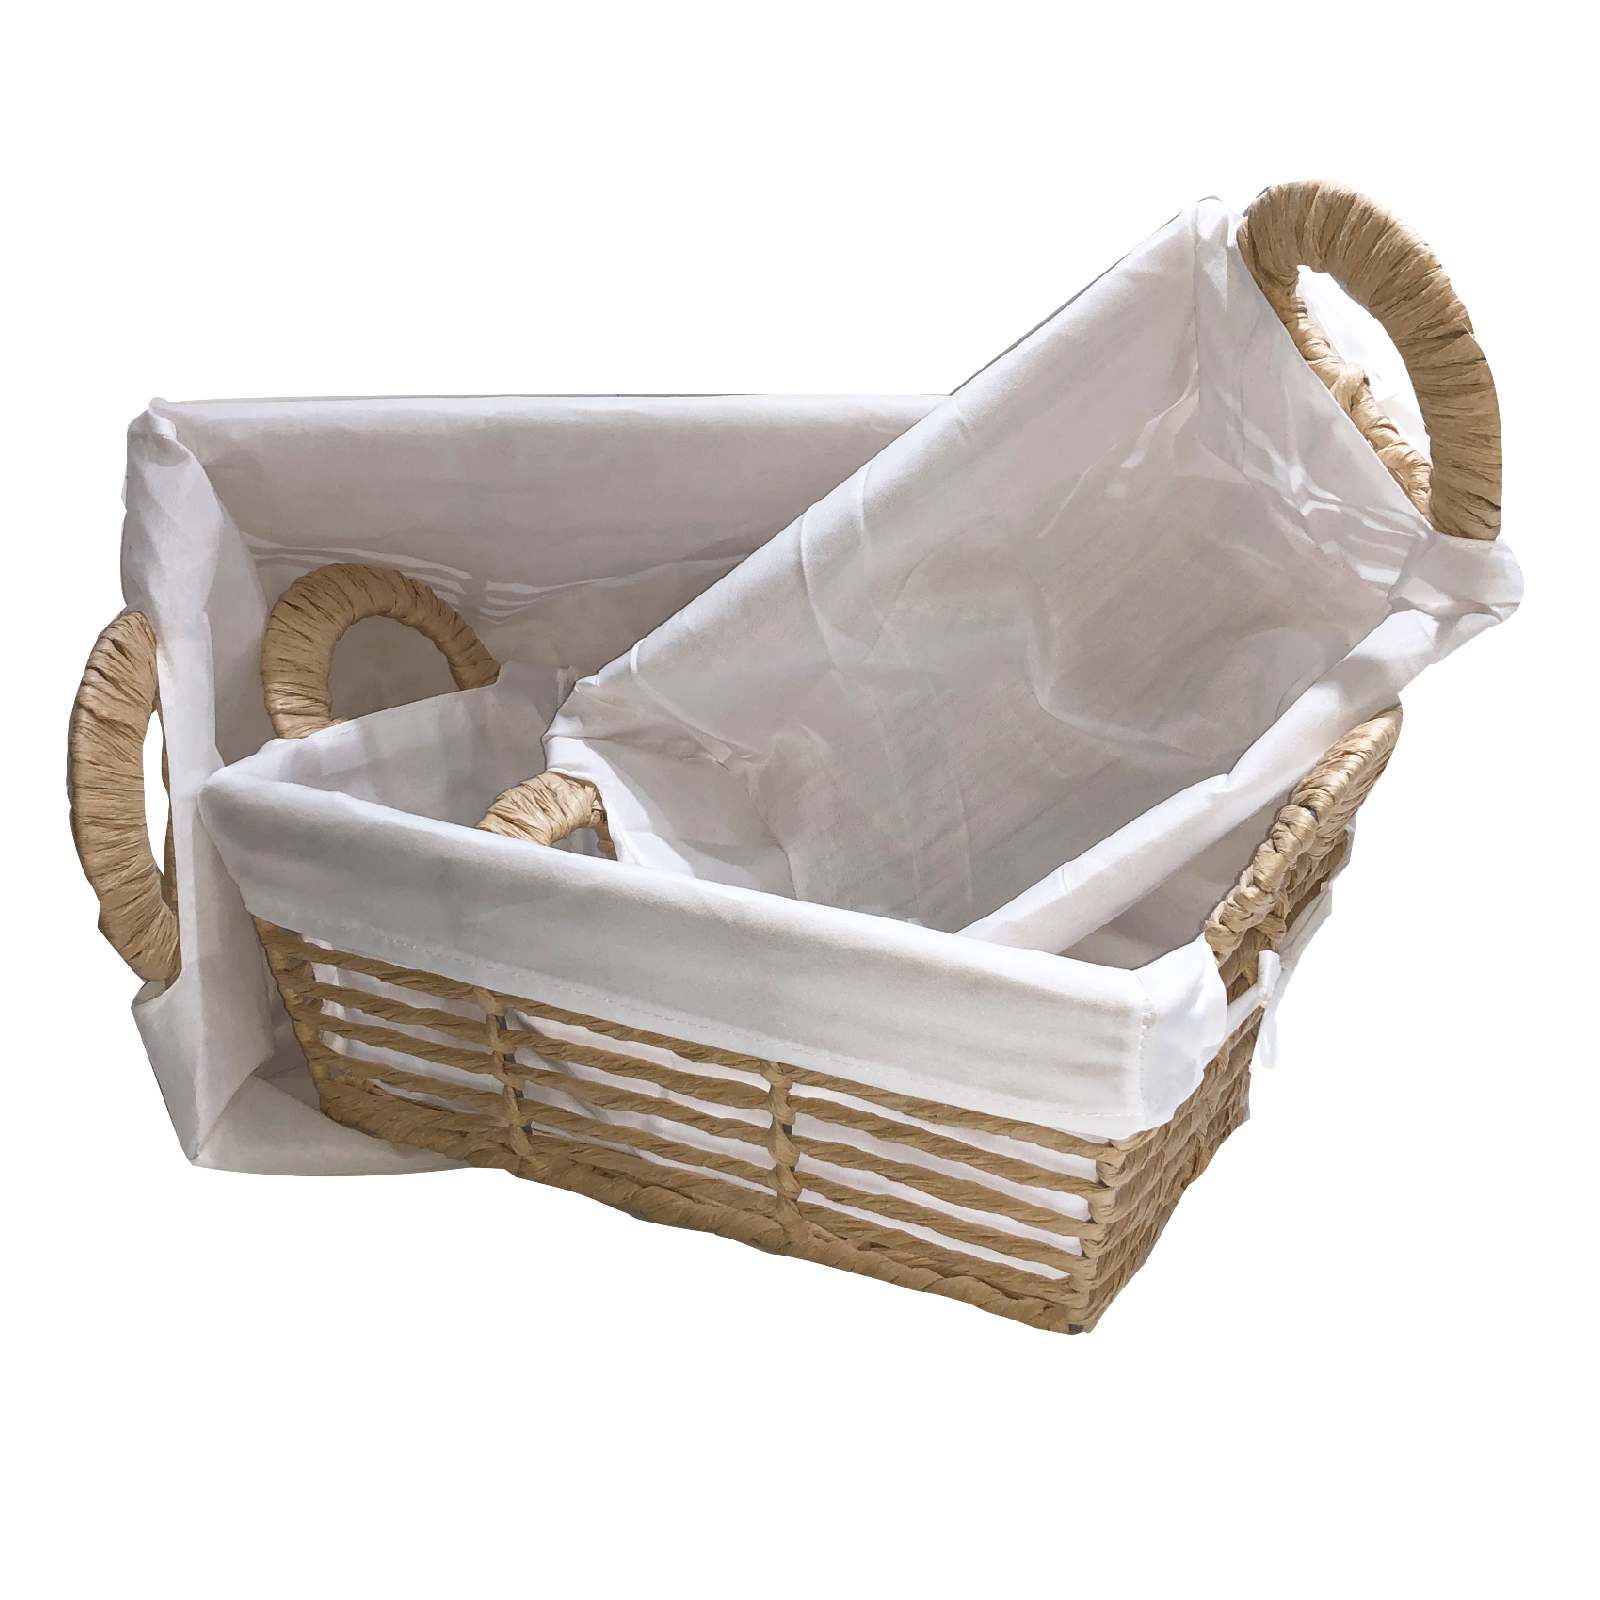 Set Of 3 Bamboo Storage Baskets Natural Beige Bamboo With White Fabric Nestable, SK094 